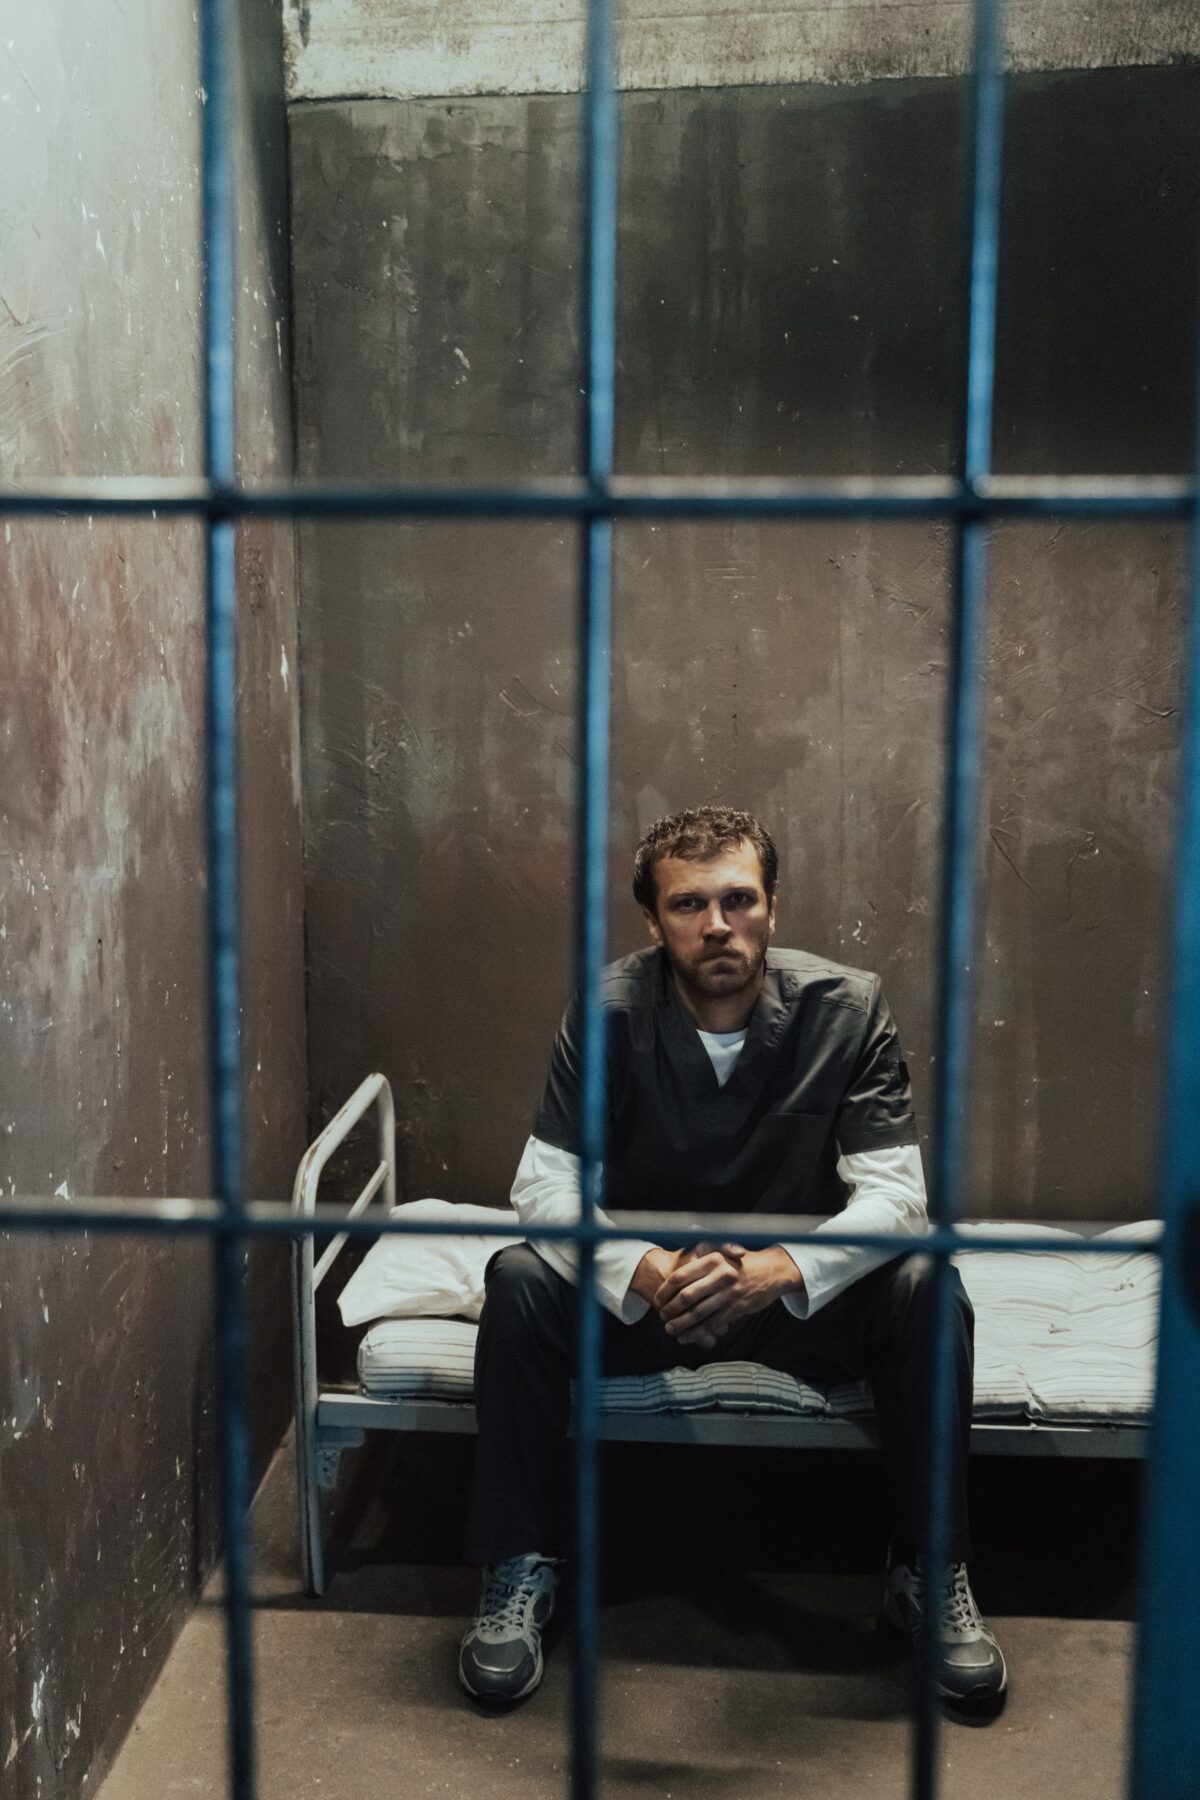 Man sitting in a jail cell.